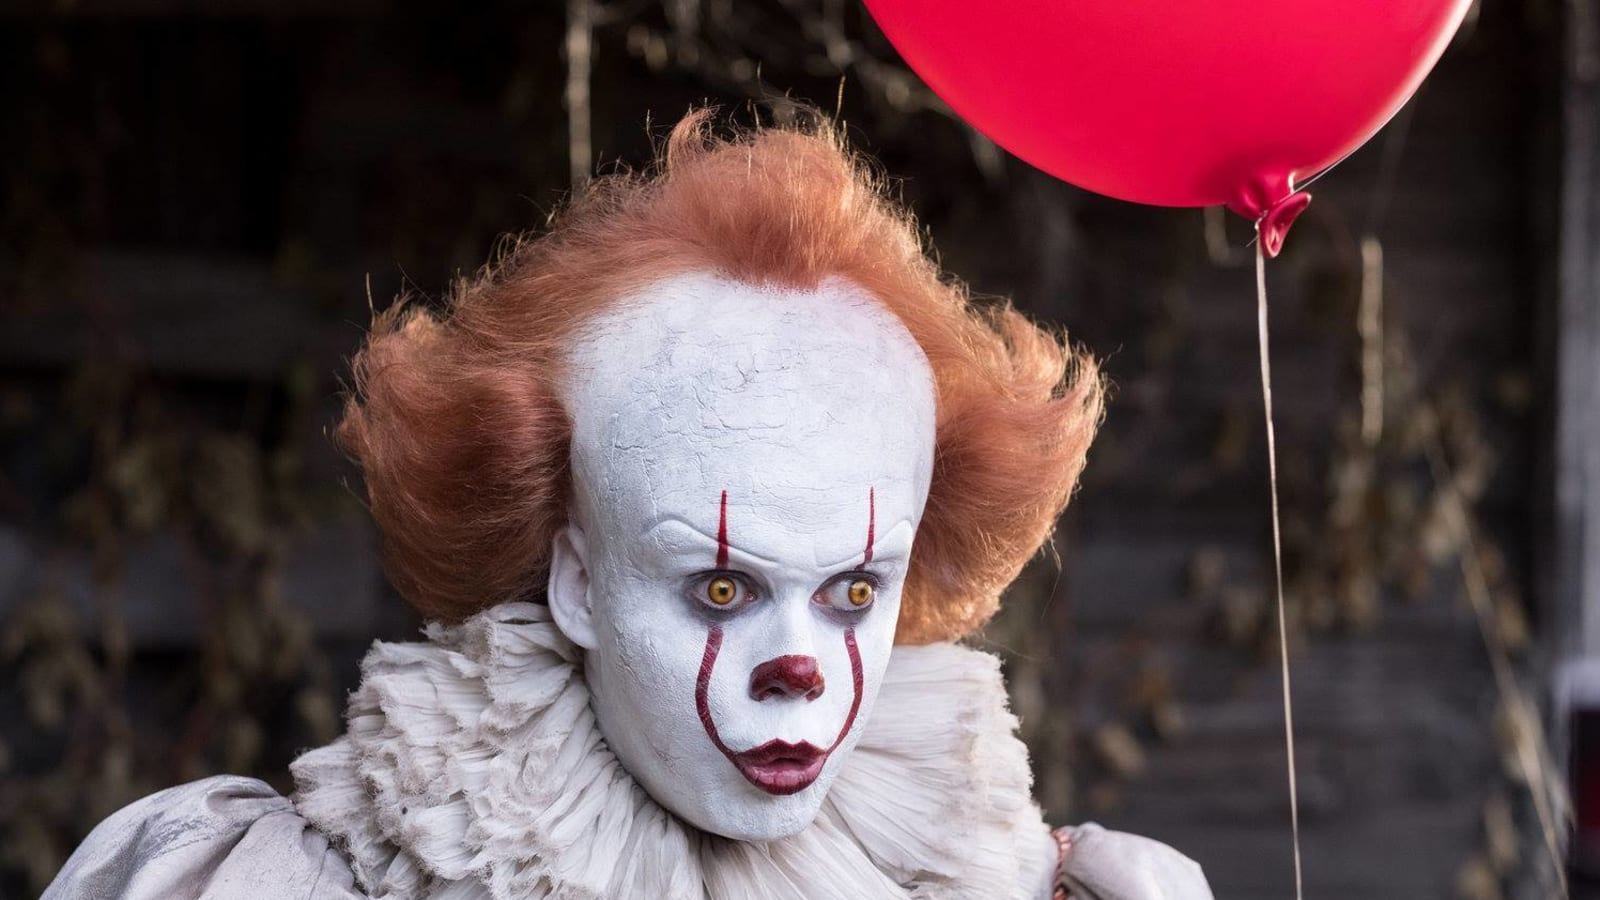 20 best horror films and franchises featuring scary clowns